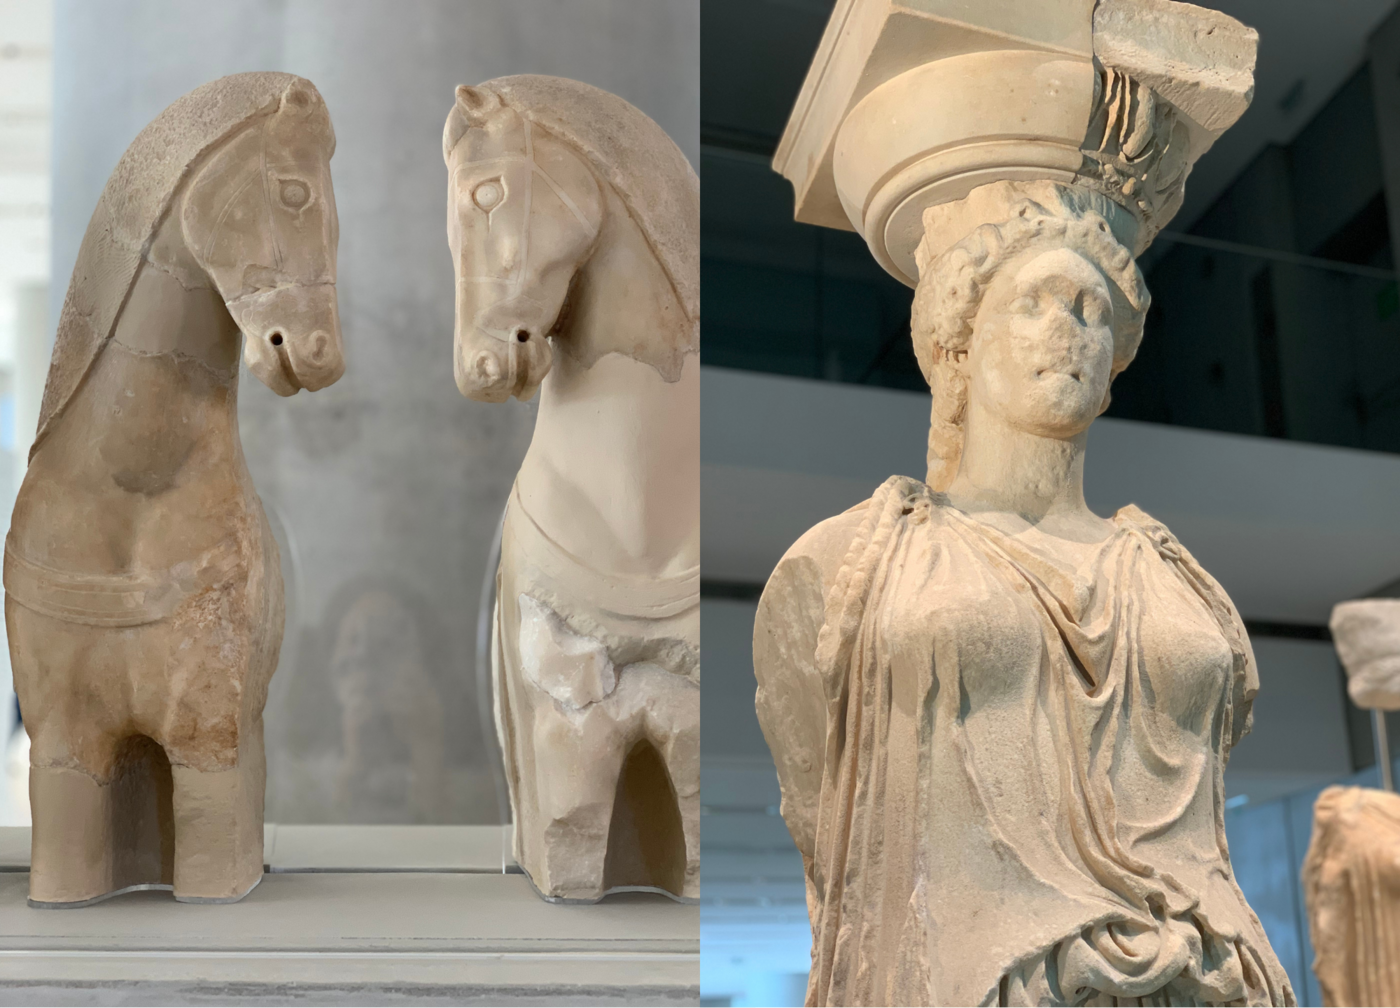 Exhibits at the Acropolis Museum.